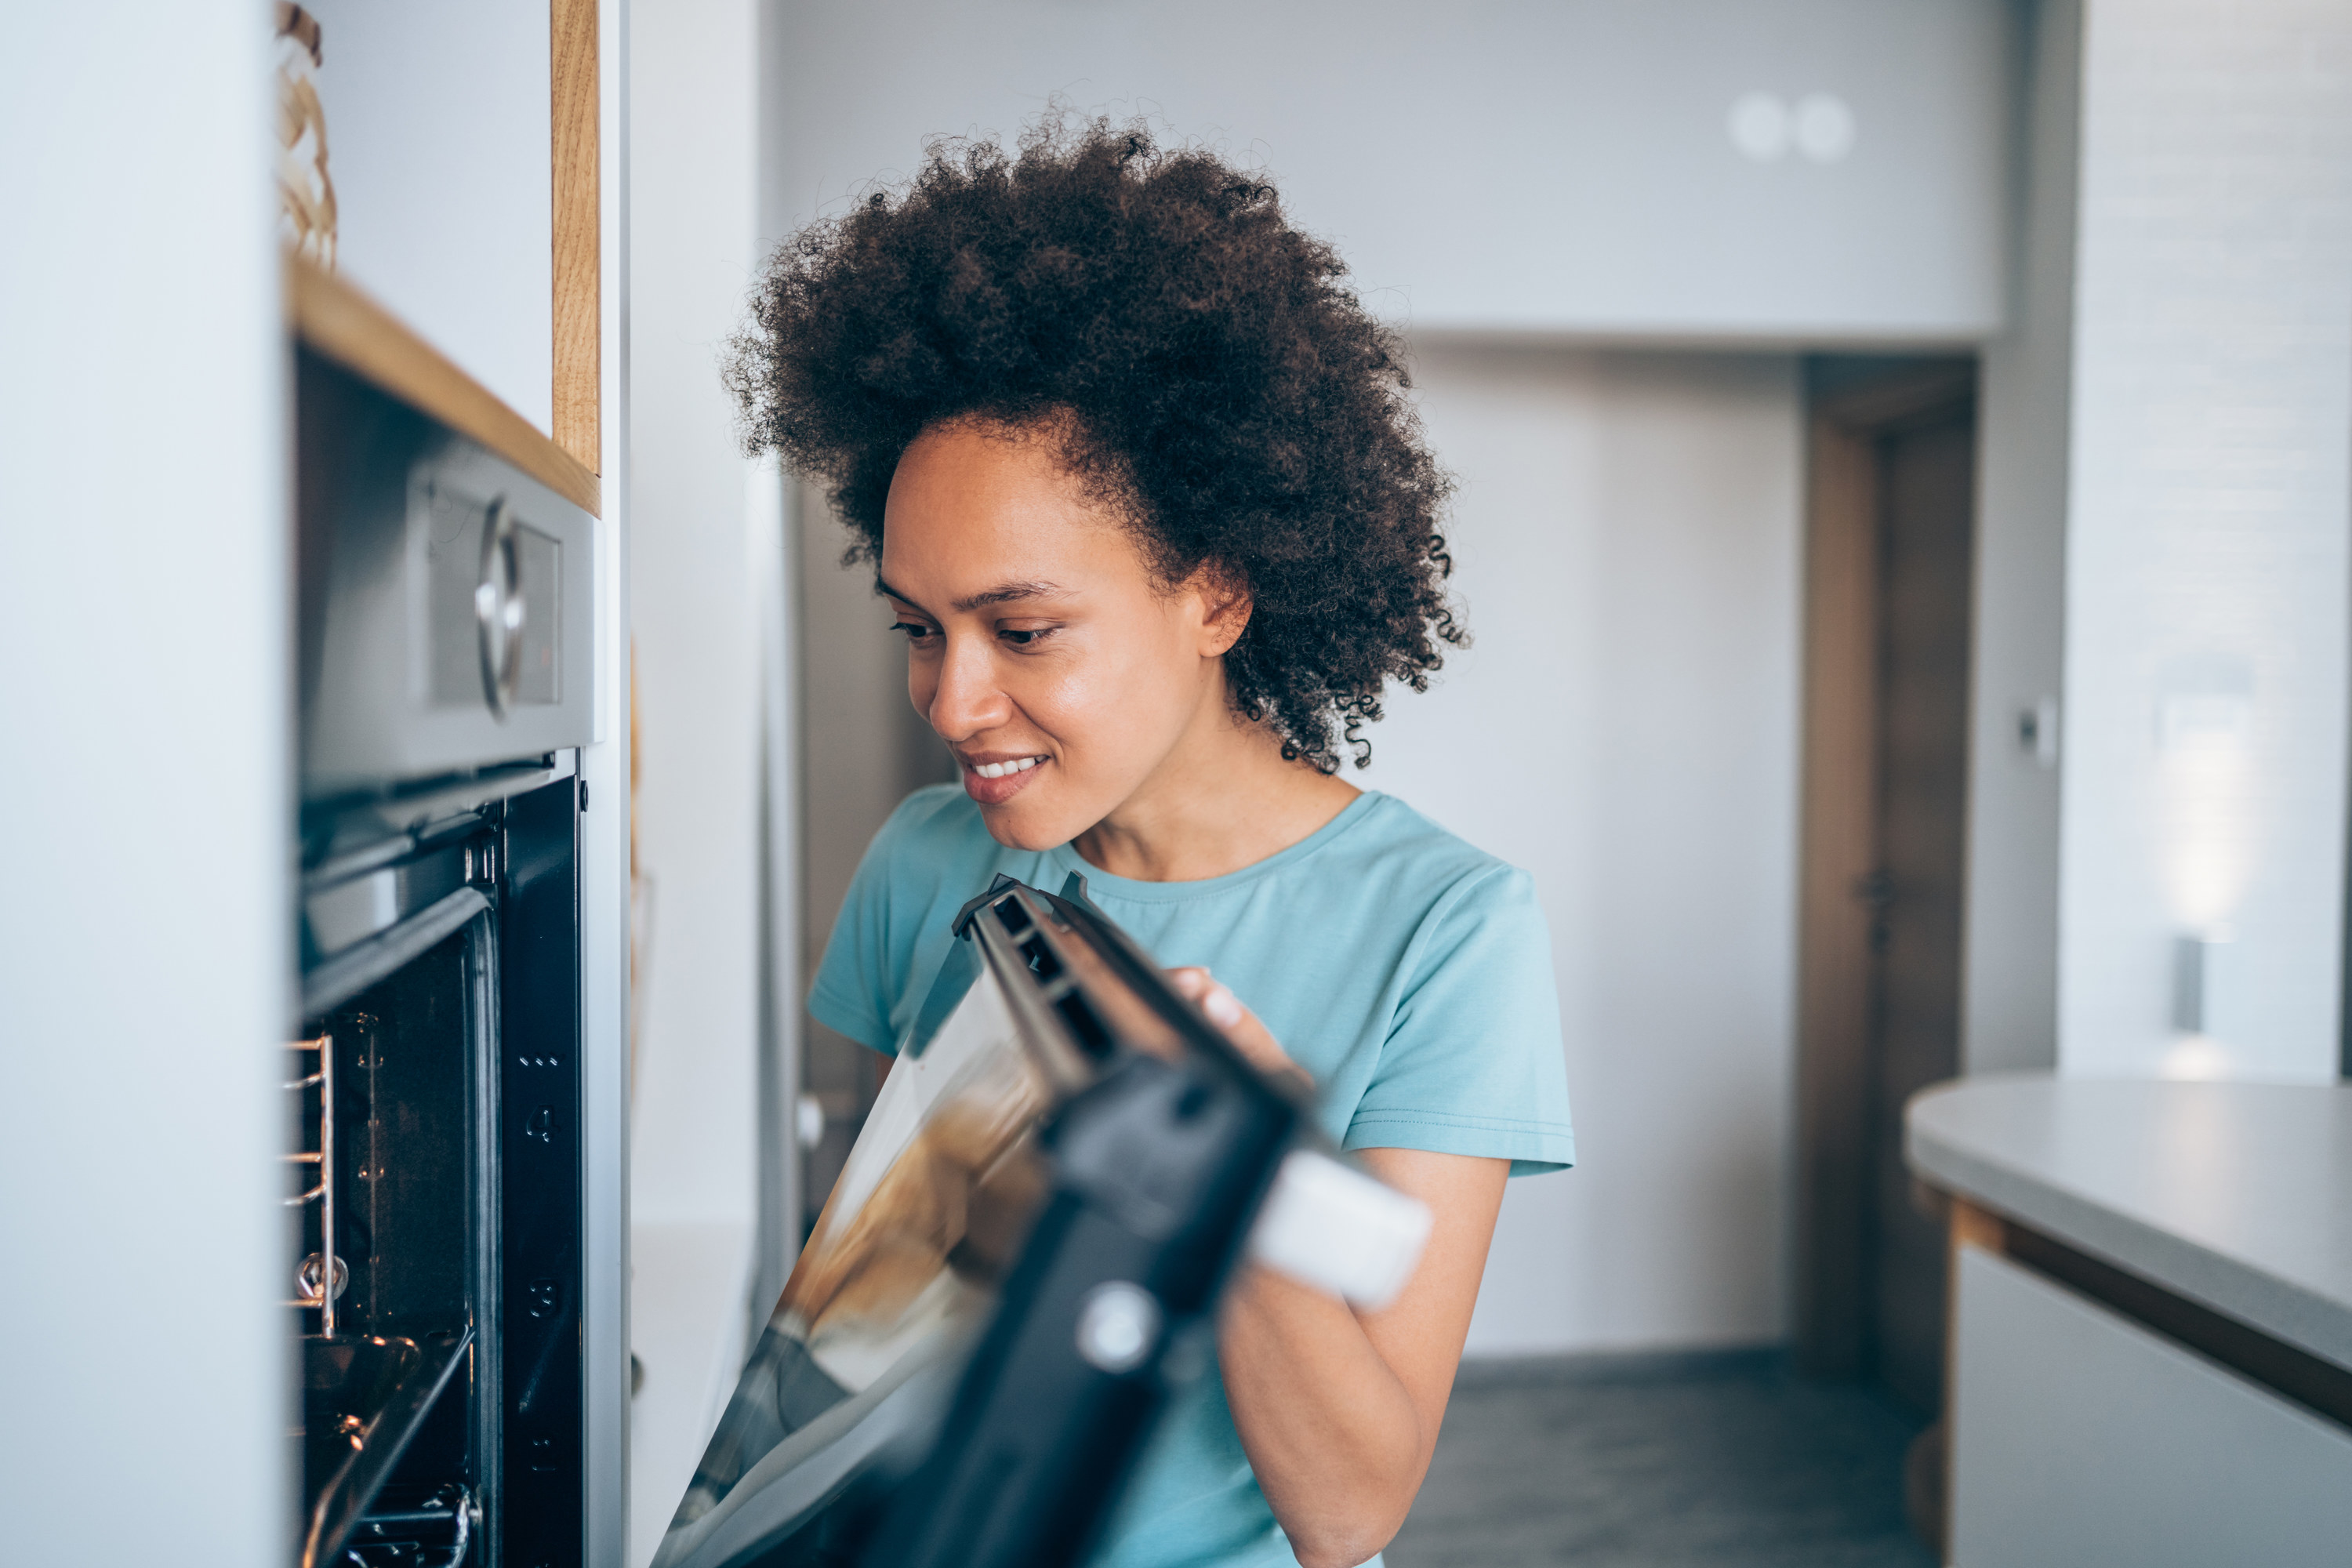 Woman opening oven to check inside it